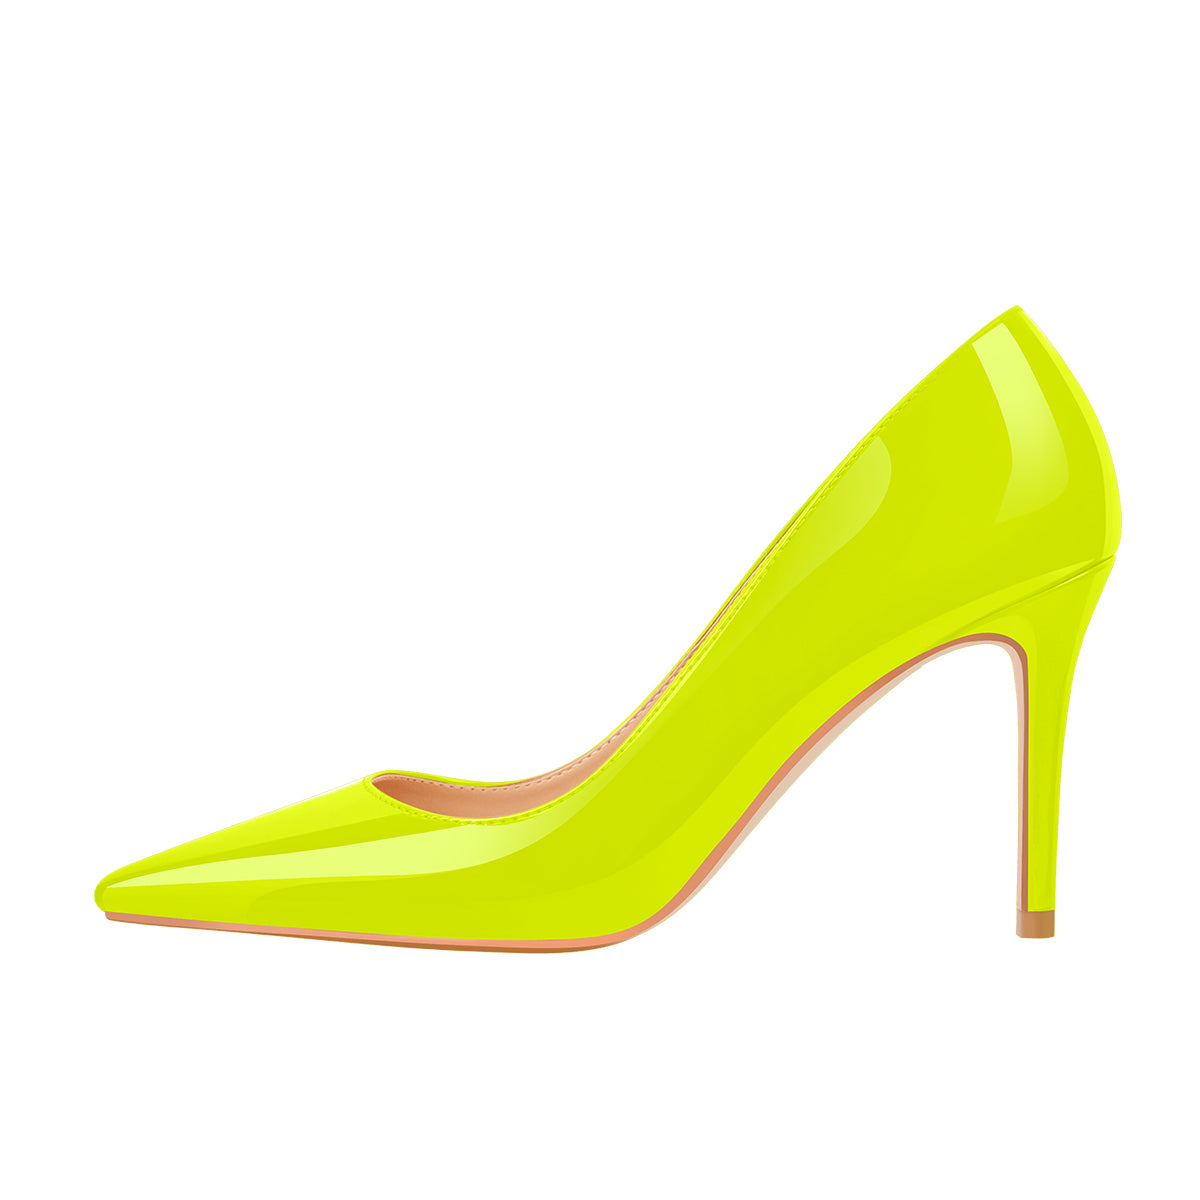 8cm Heel Patent Leather Yellow Pointed Toe High Heel Pumps – Onlymaker